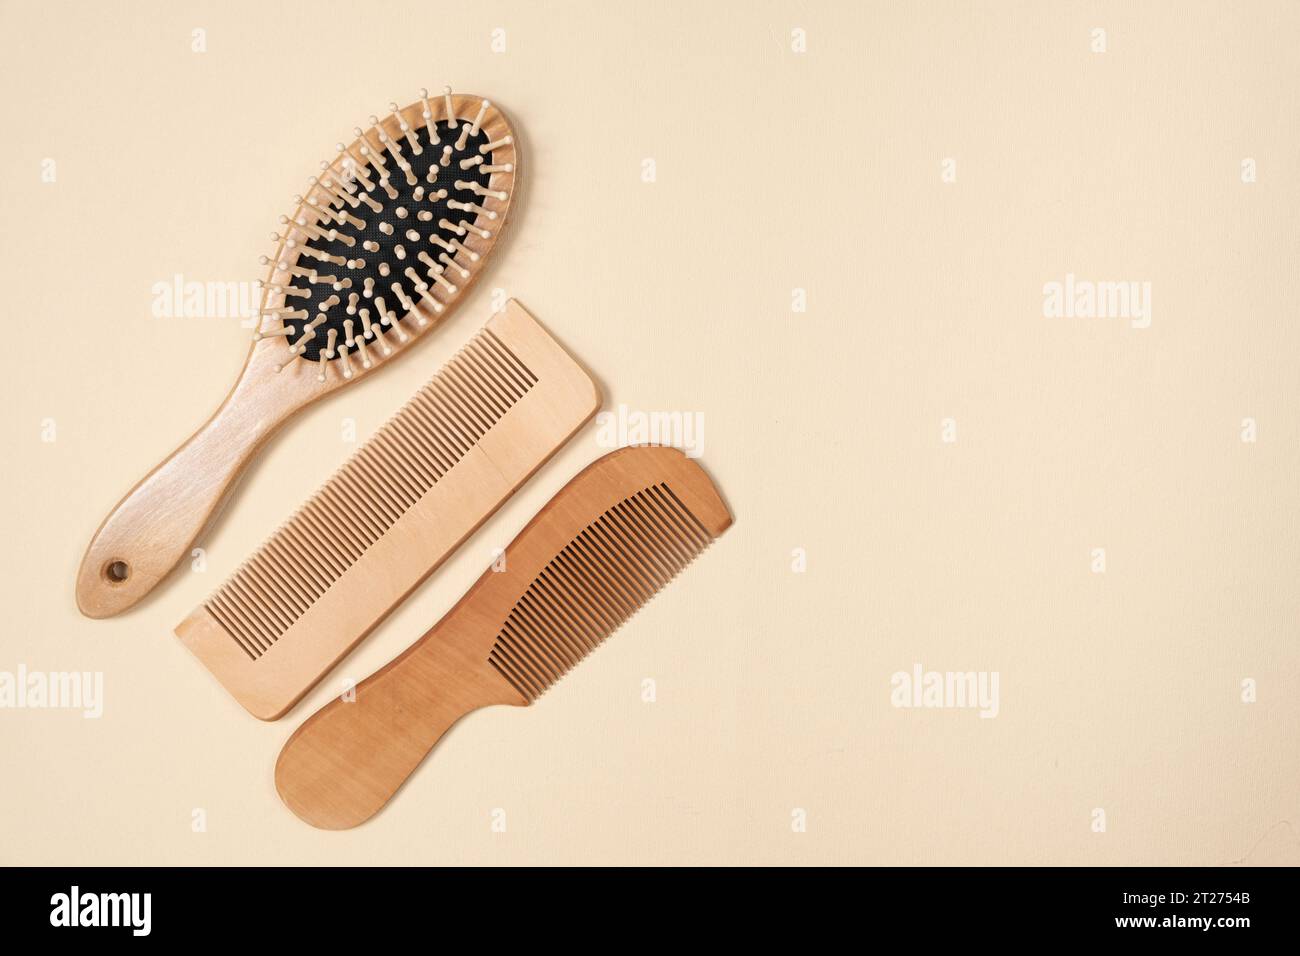 Wooden combs and hair care brush on beige background, top view, space for text. Stock Photo